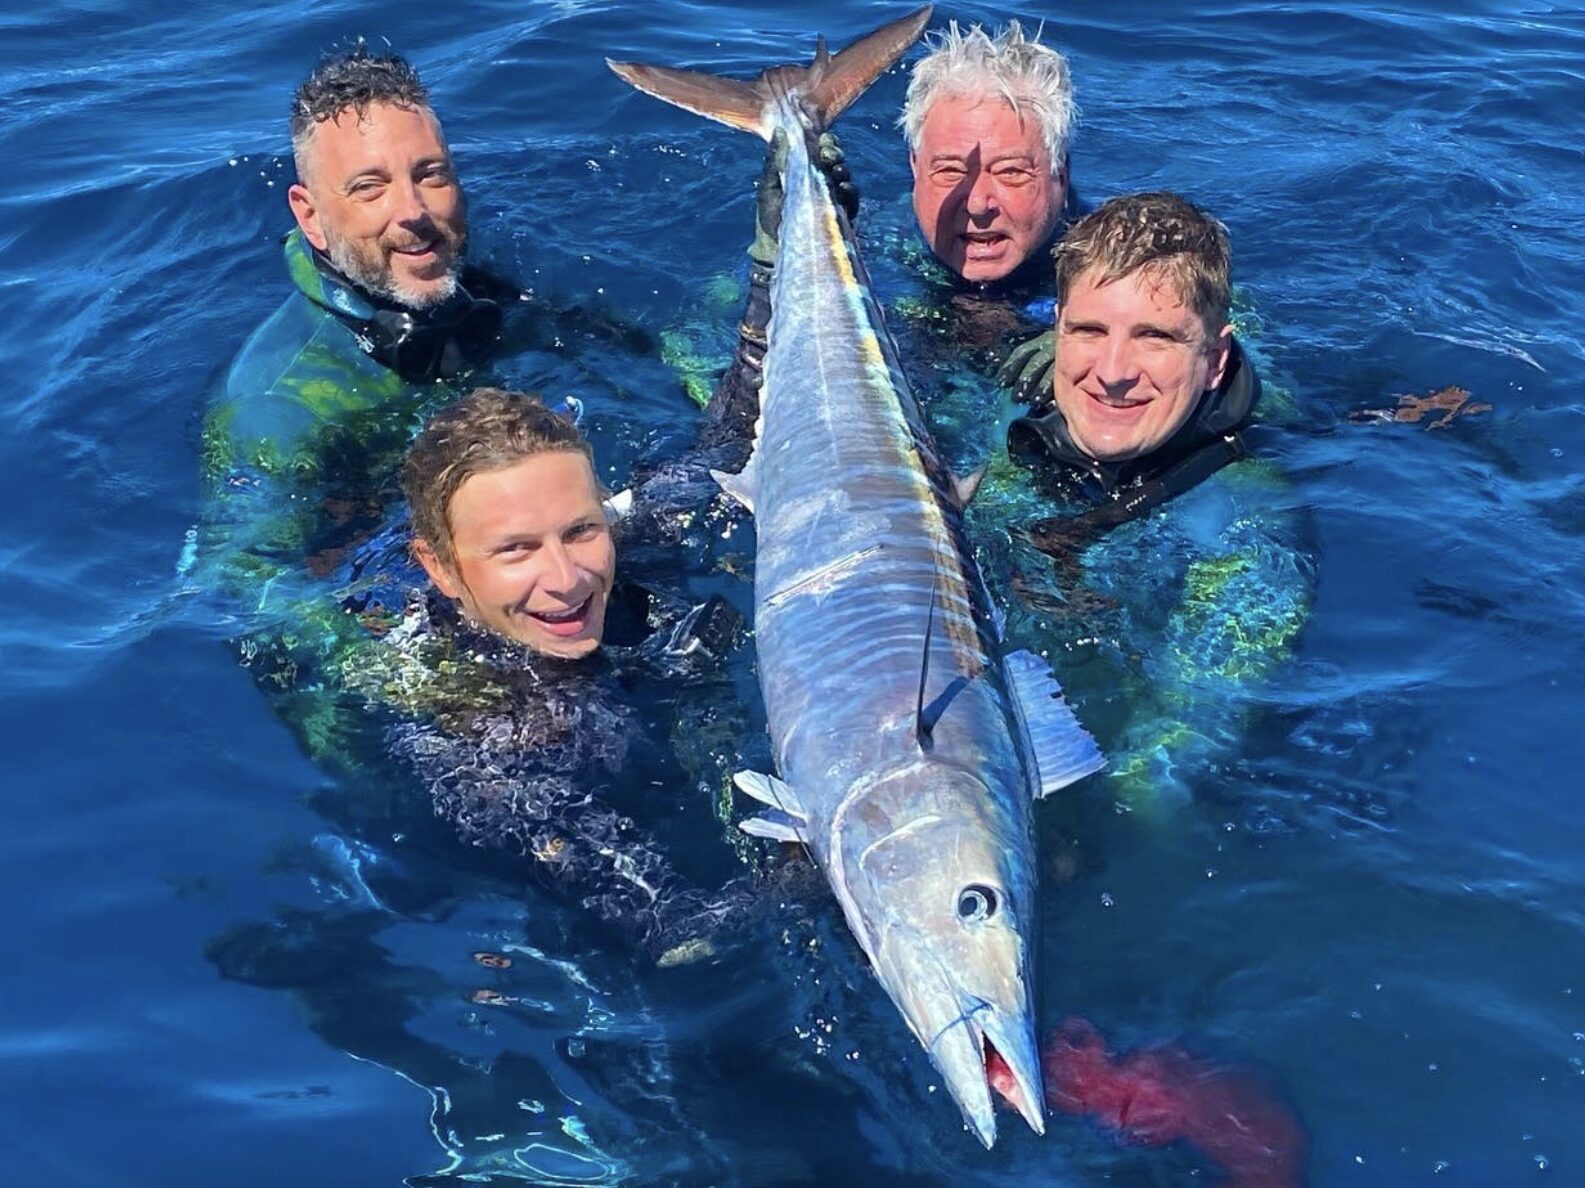 Four men in wetsuits spearfish wahoo fish in the Florida Keys during a spearfishing charter.